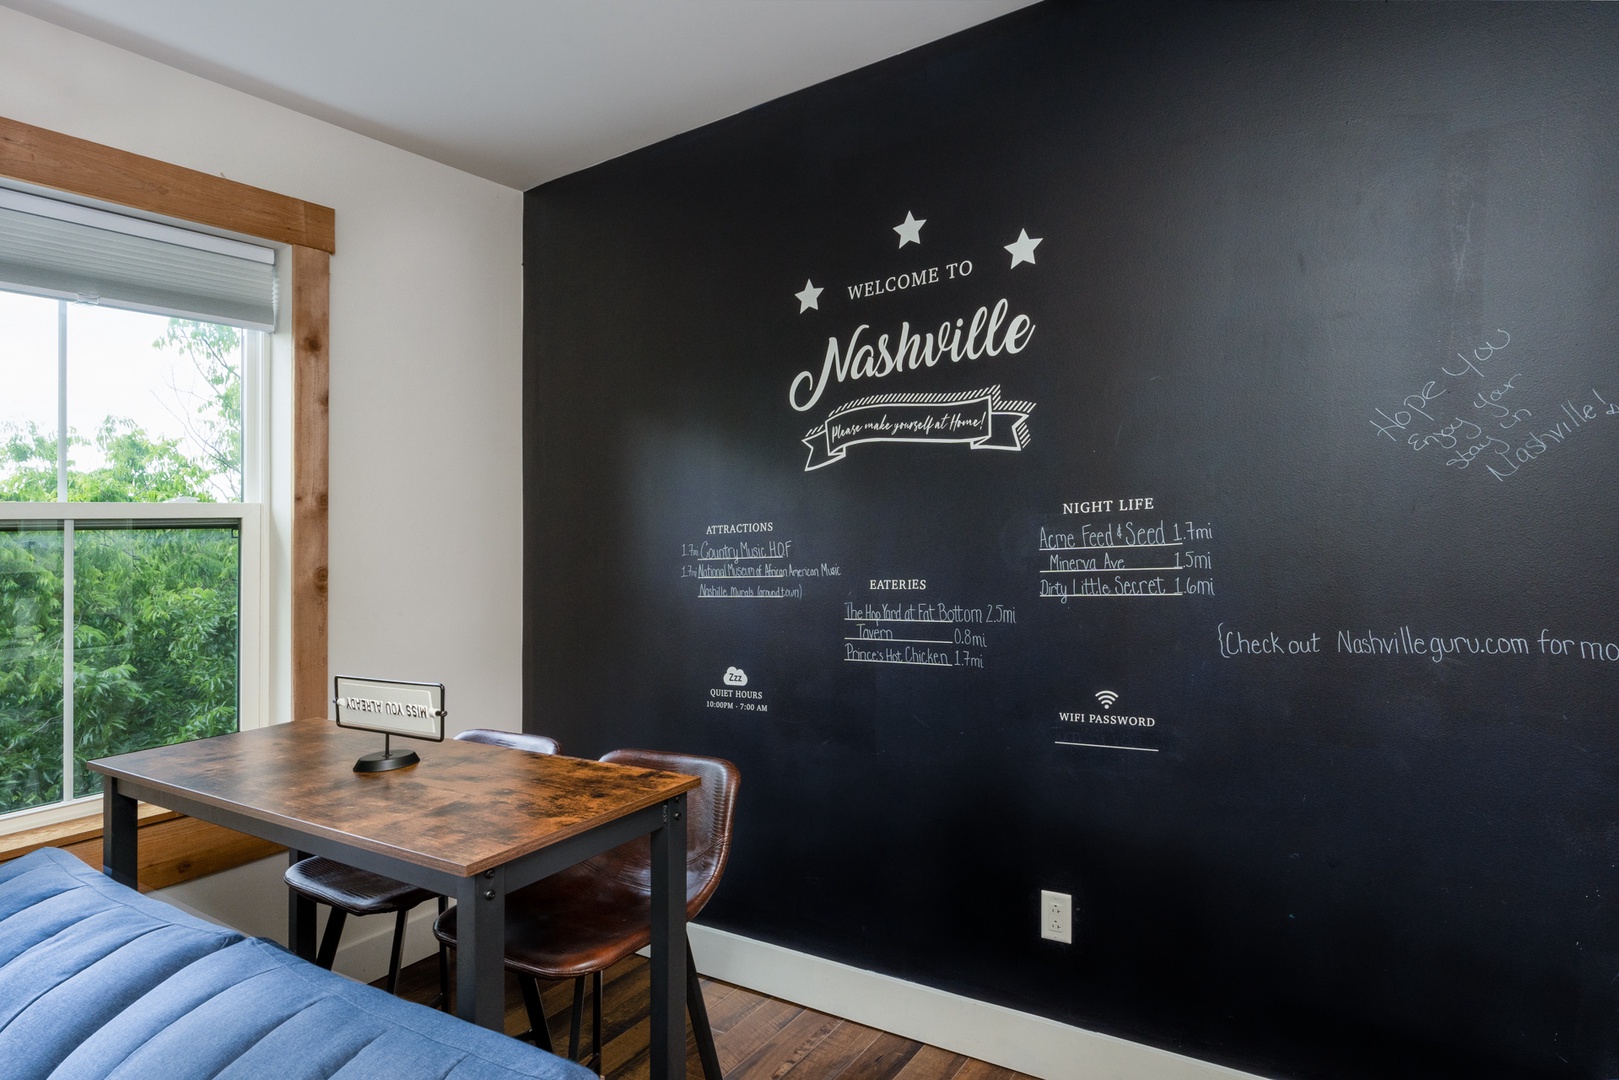 Come home and relax after exploring the best Nashville has to offer